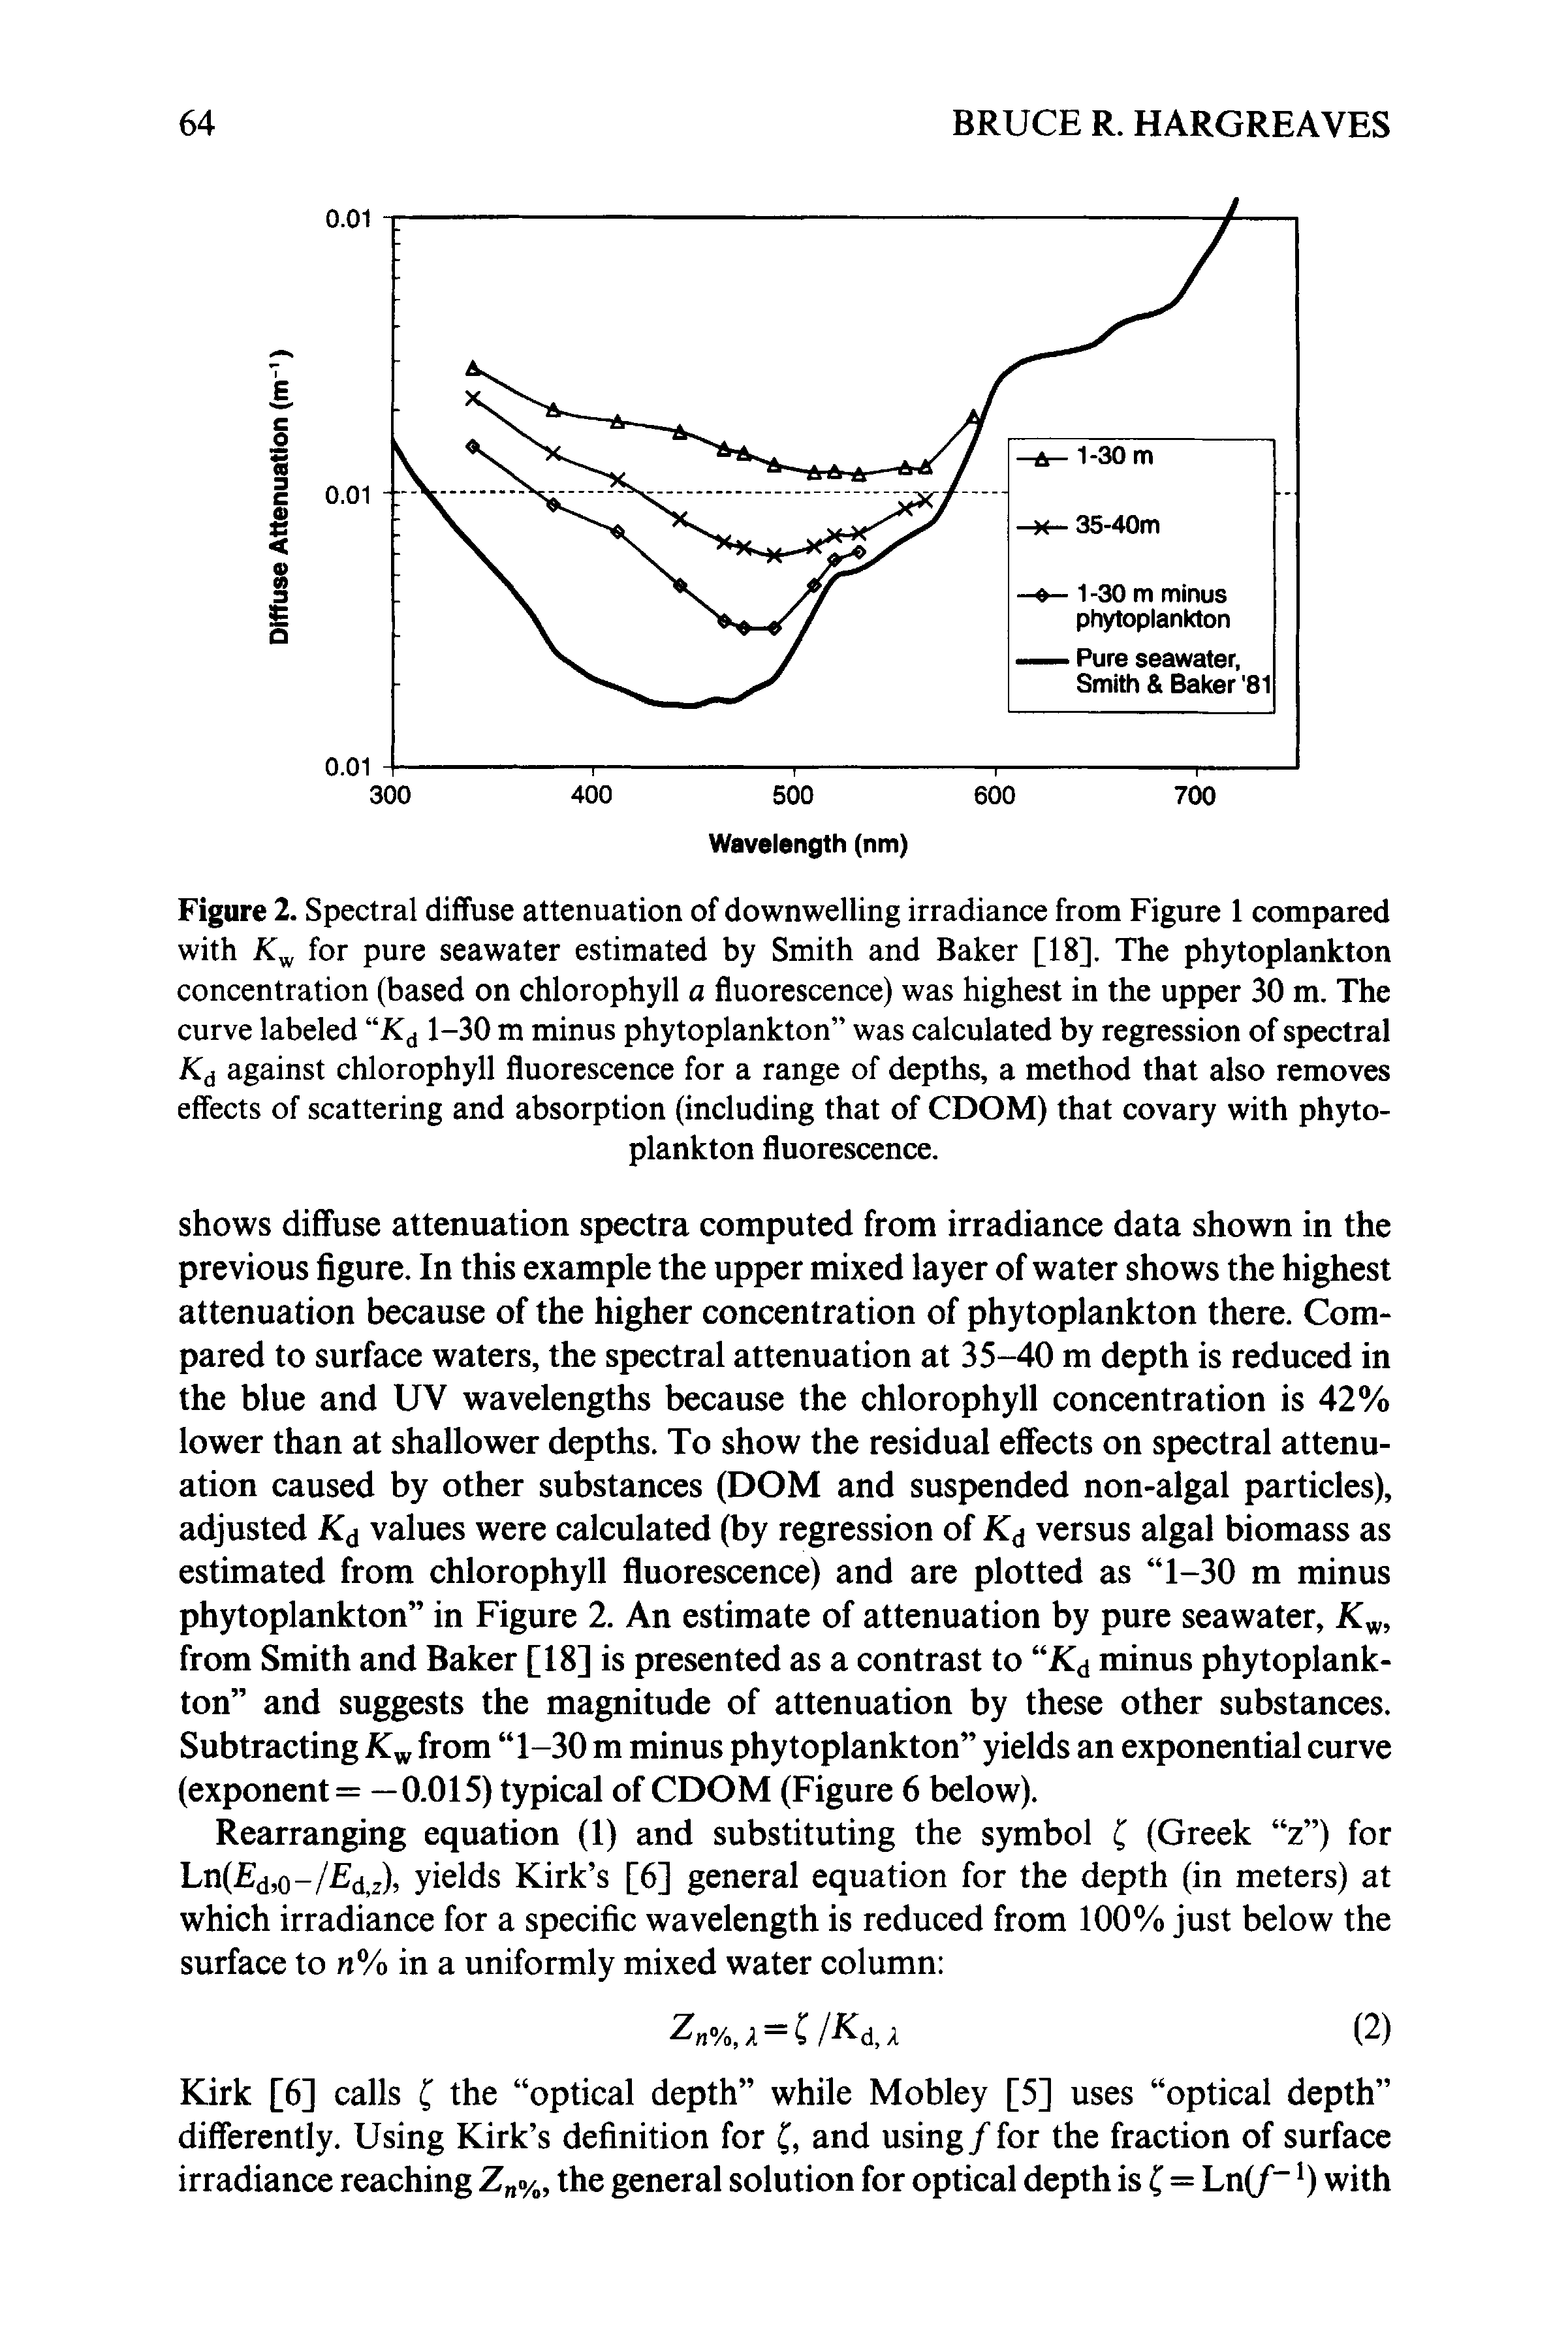 Figure 2. Spectral diffuse attenuation of downwelling irradiance from Figure 1 compared with for pure seawater estimated by Smith and Baker [18], The phytoplankton concentration (based on chlorophyll a fluorescence) was highest in the upper 30 m. The curve labeled 1-30 m minus phytoplankton was calculated by regression of spectral Xjj against chlorophyll fluorescence for a range of depths, a method that also removes effects of scattering and absorption (including that of CDOM) that covary with phytoplankton fluorescence.